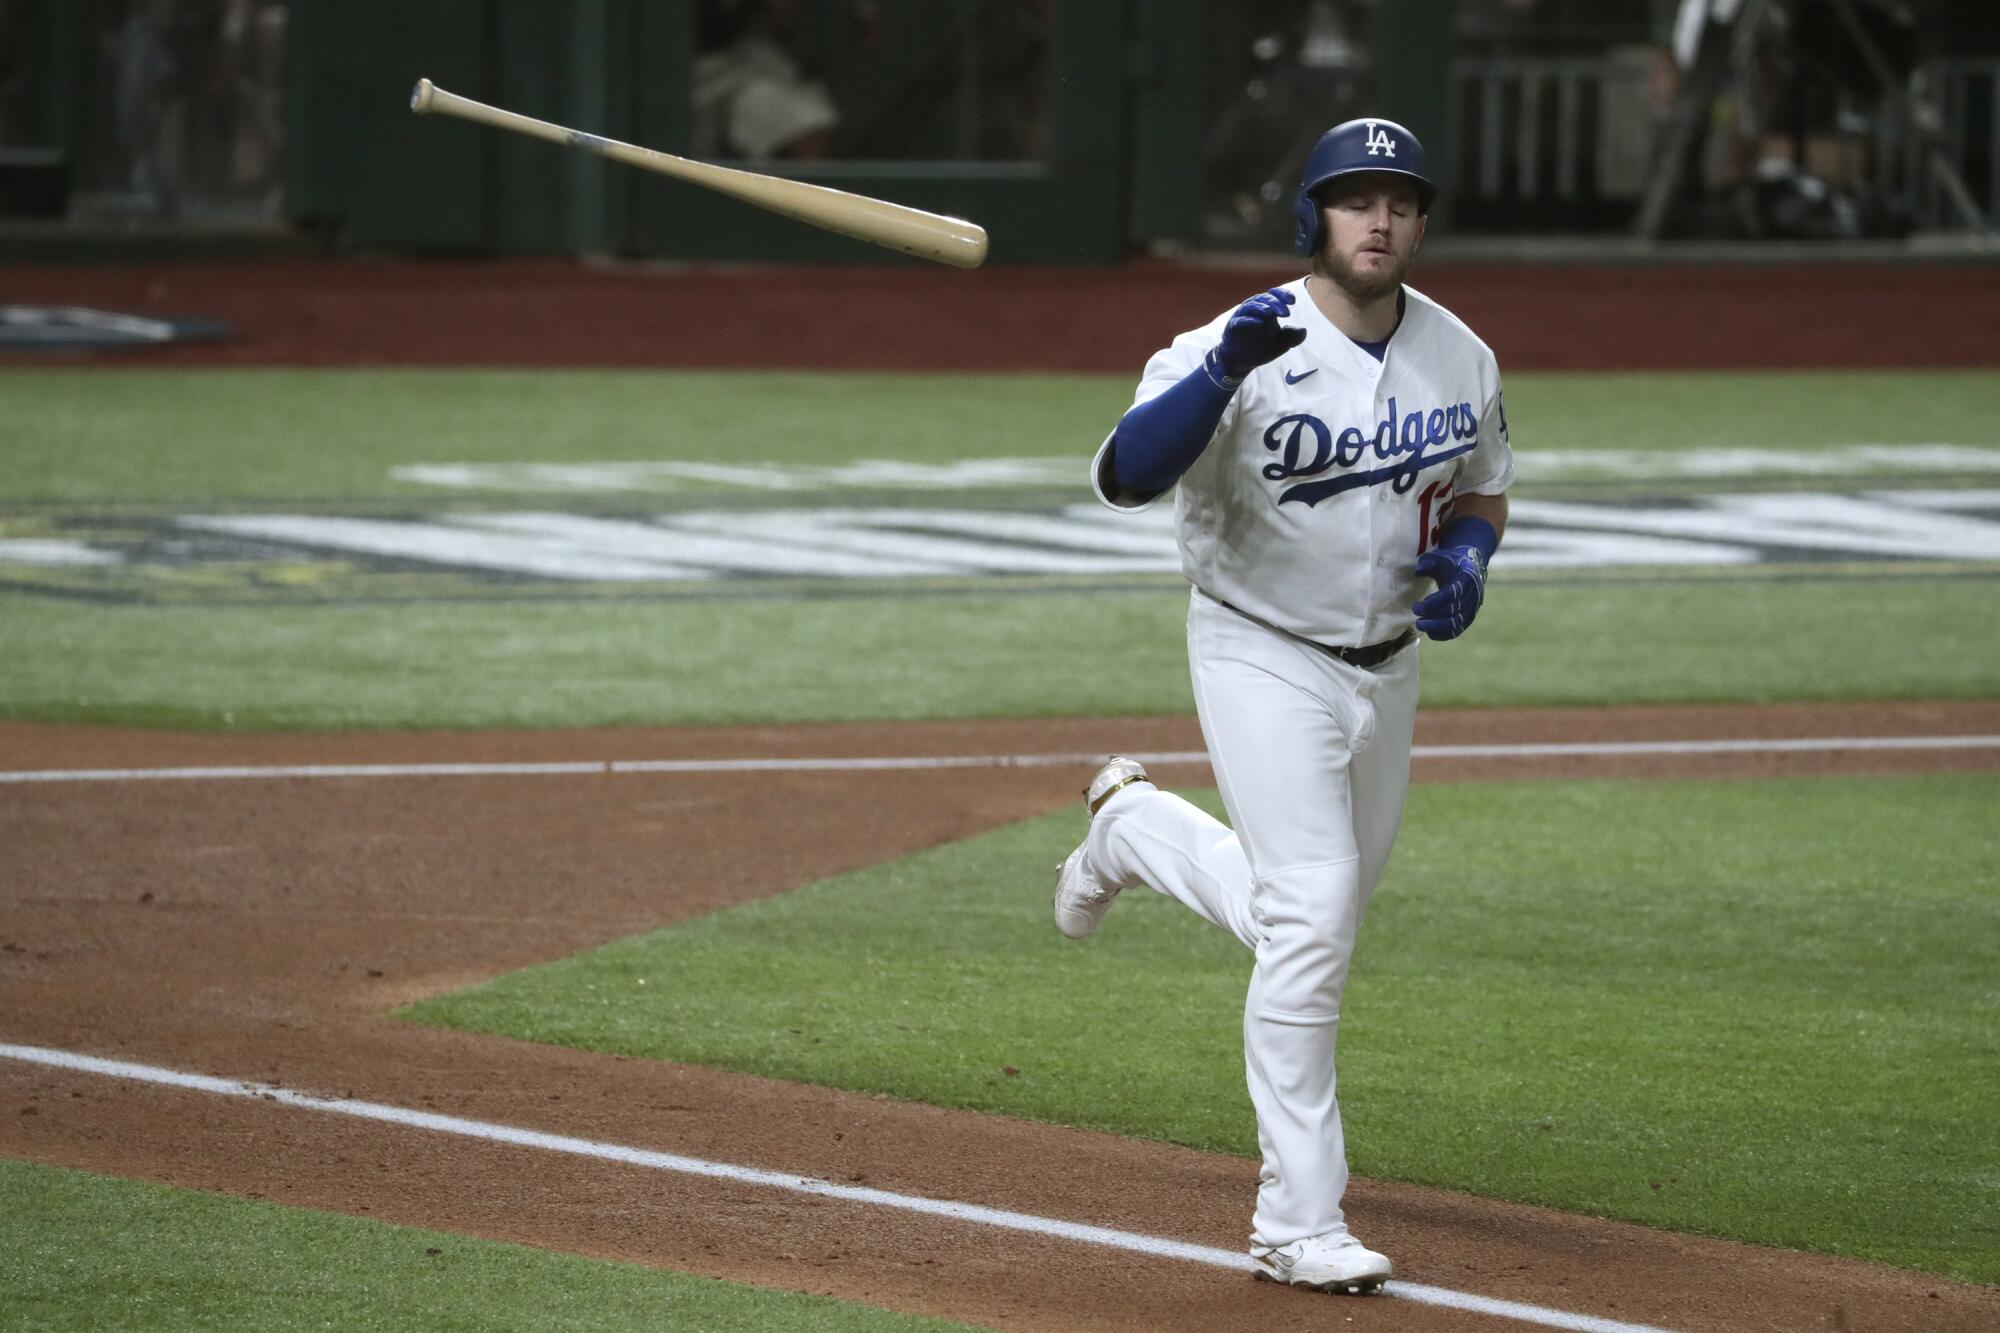 Dodgers first baseman Max Muncy flips away the bat after drawing a walk in the first inning of Game 1 of the NLCS.